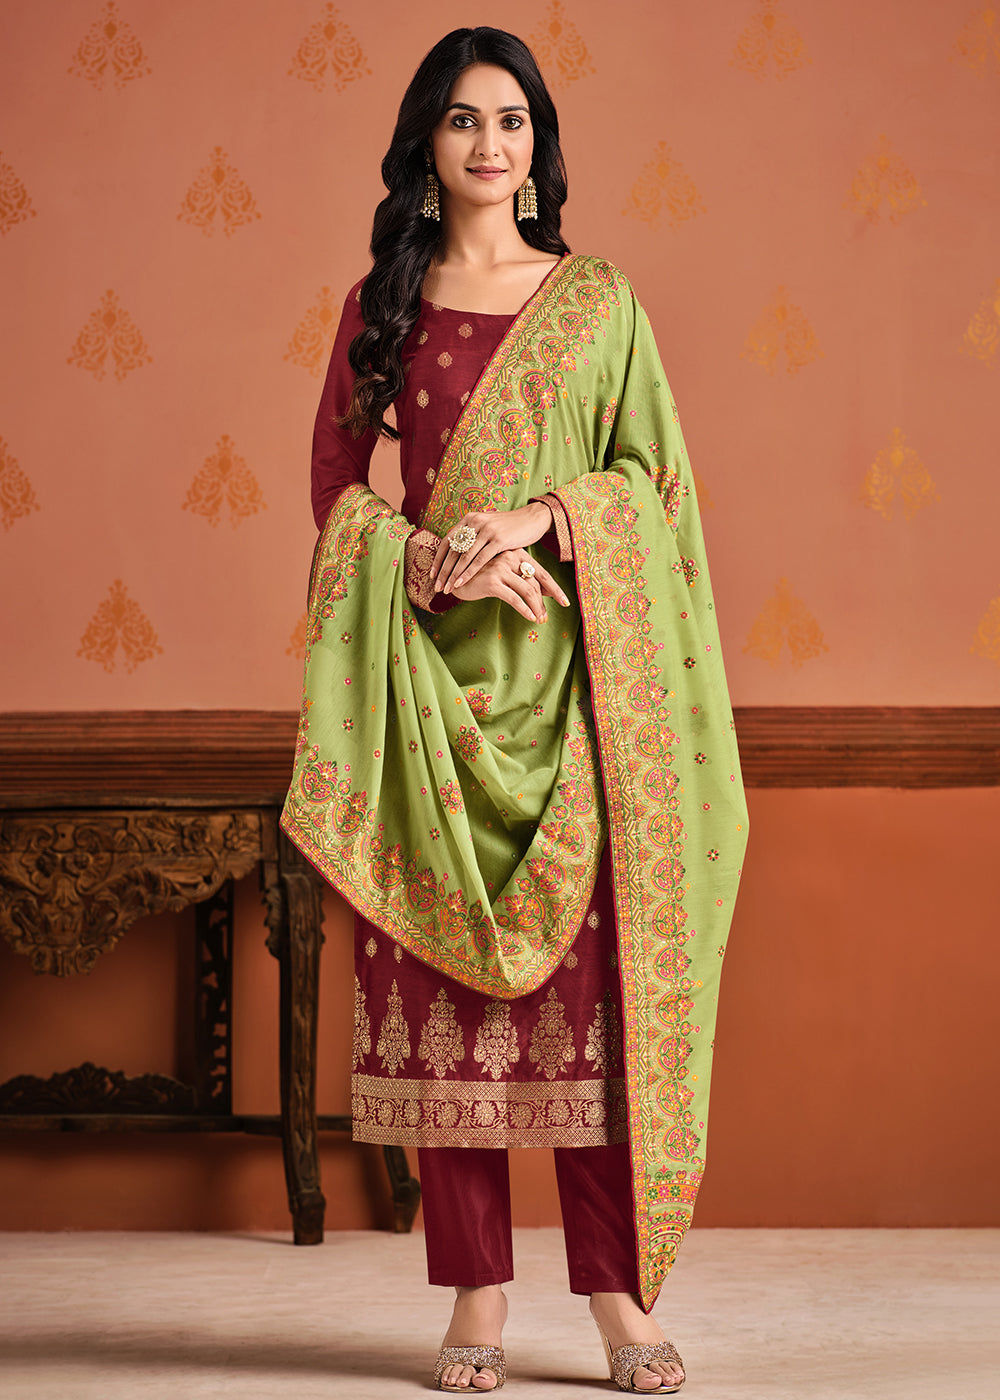 Buy Now Red & Green Silk Jacquard Sangeet Wear Pant Style Salwar Suit Online in USA, UK, Canada & Worldwide at Empress Clothing.